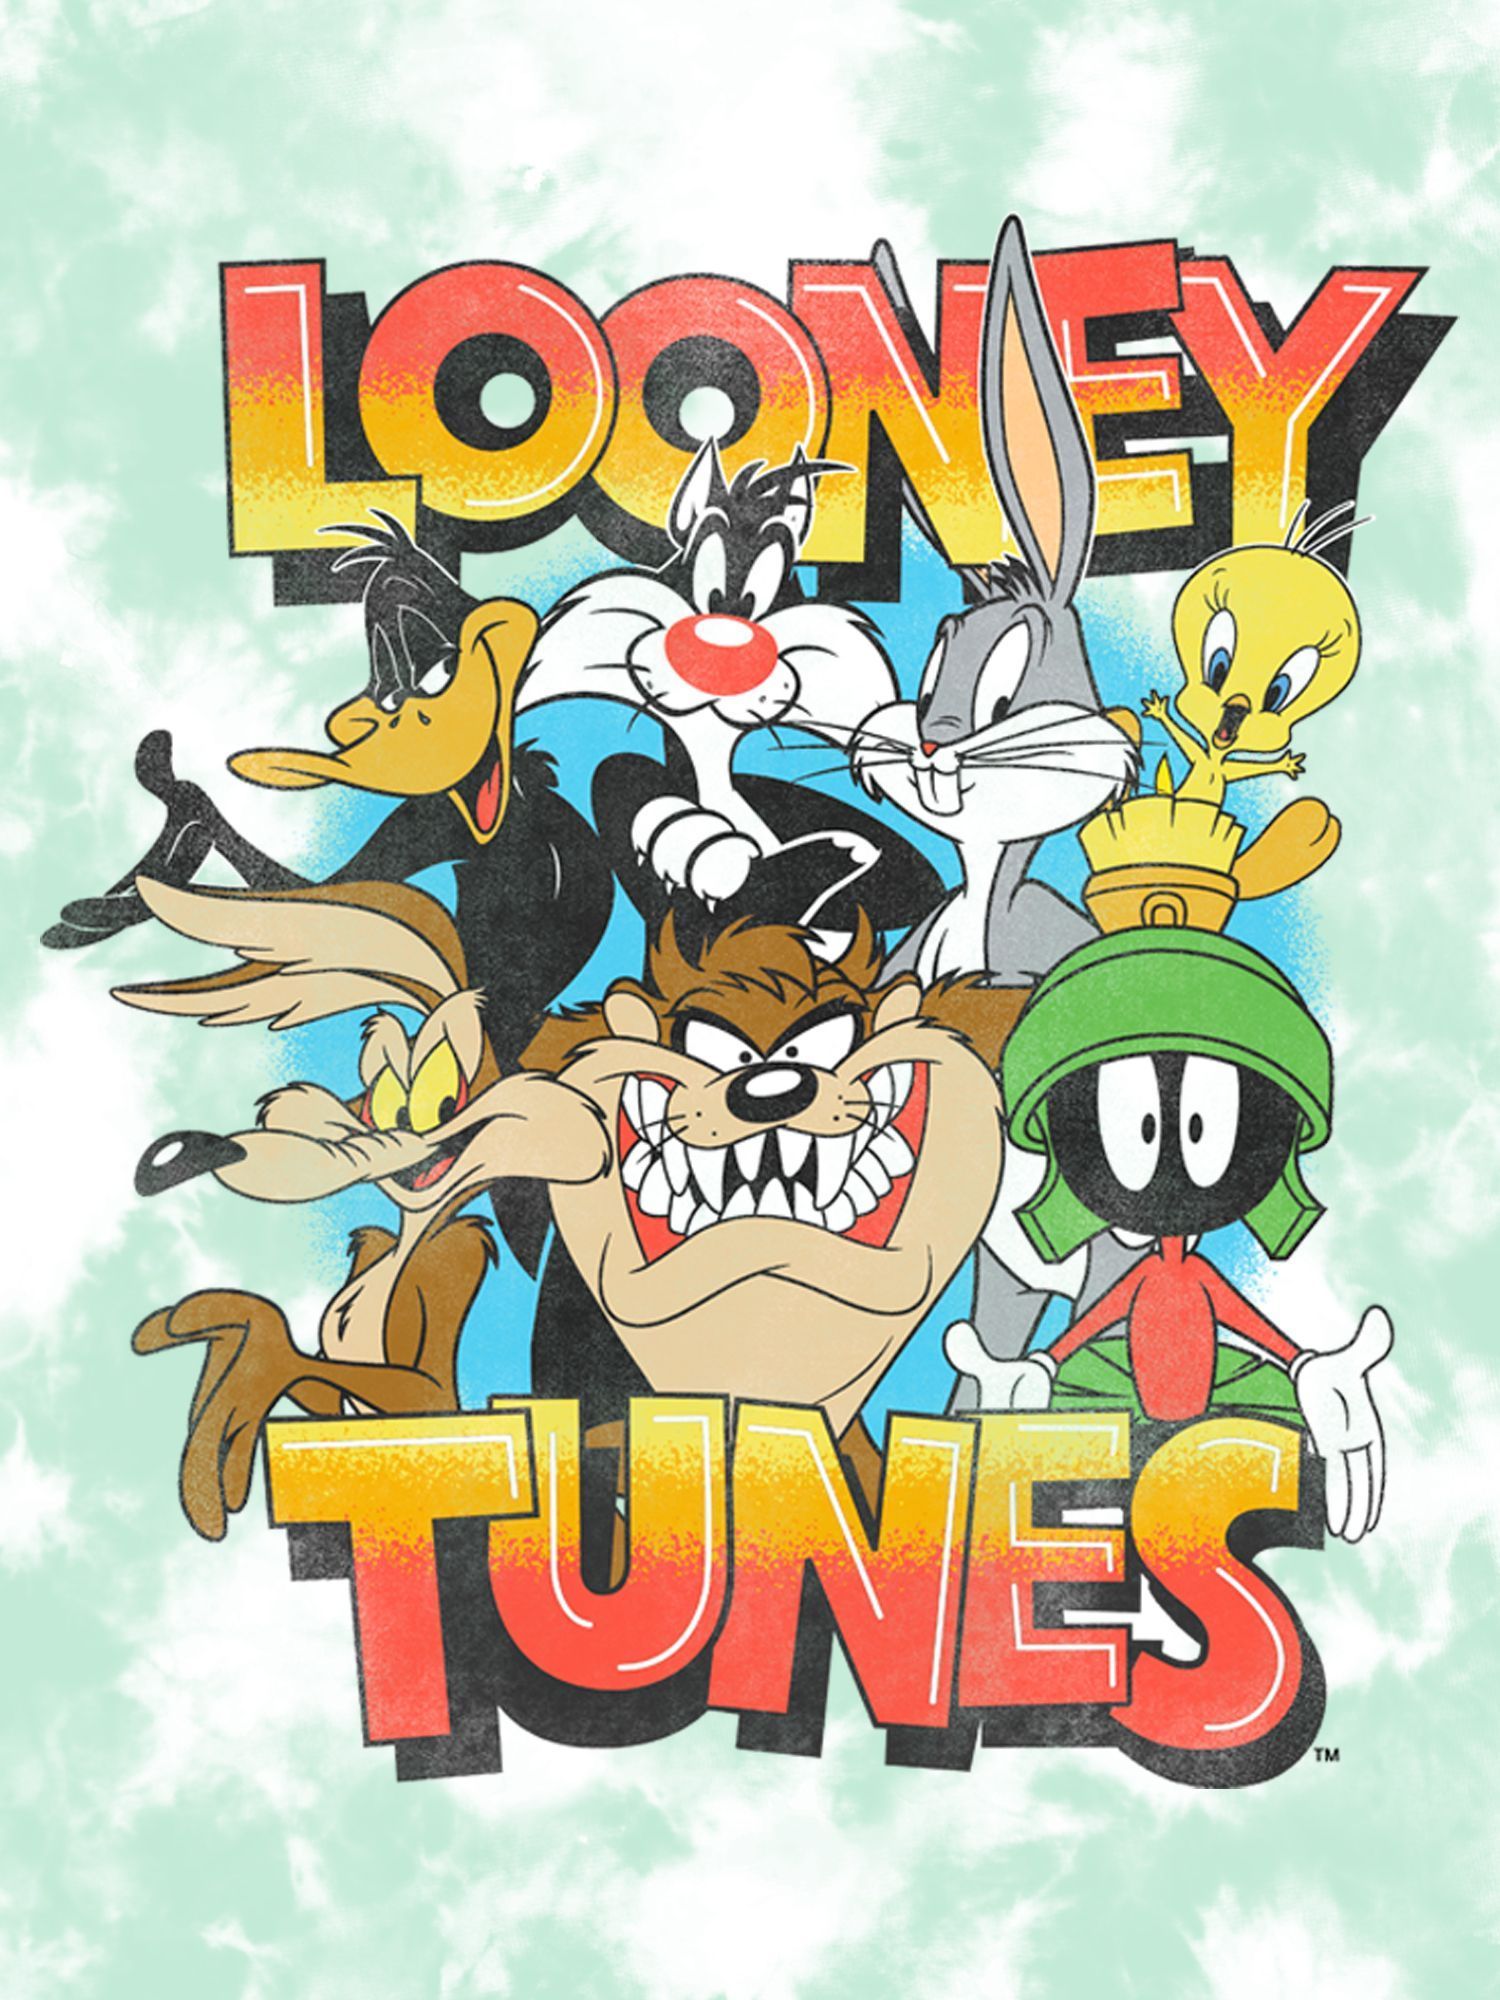 Looney tunes logo with the characters in it - Looney Tunes